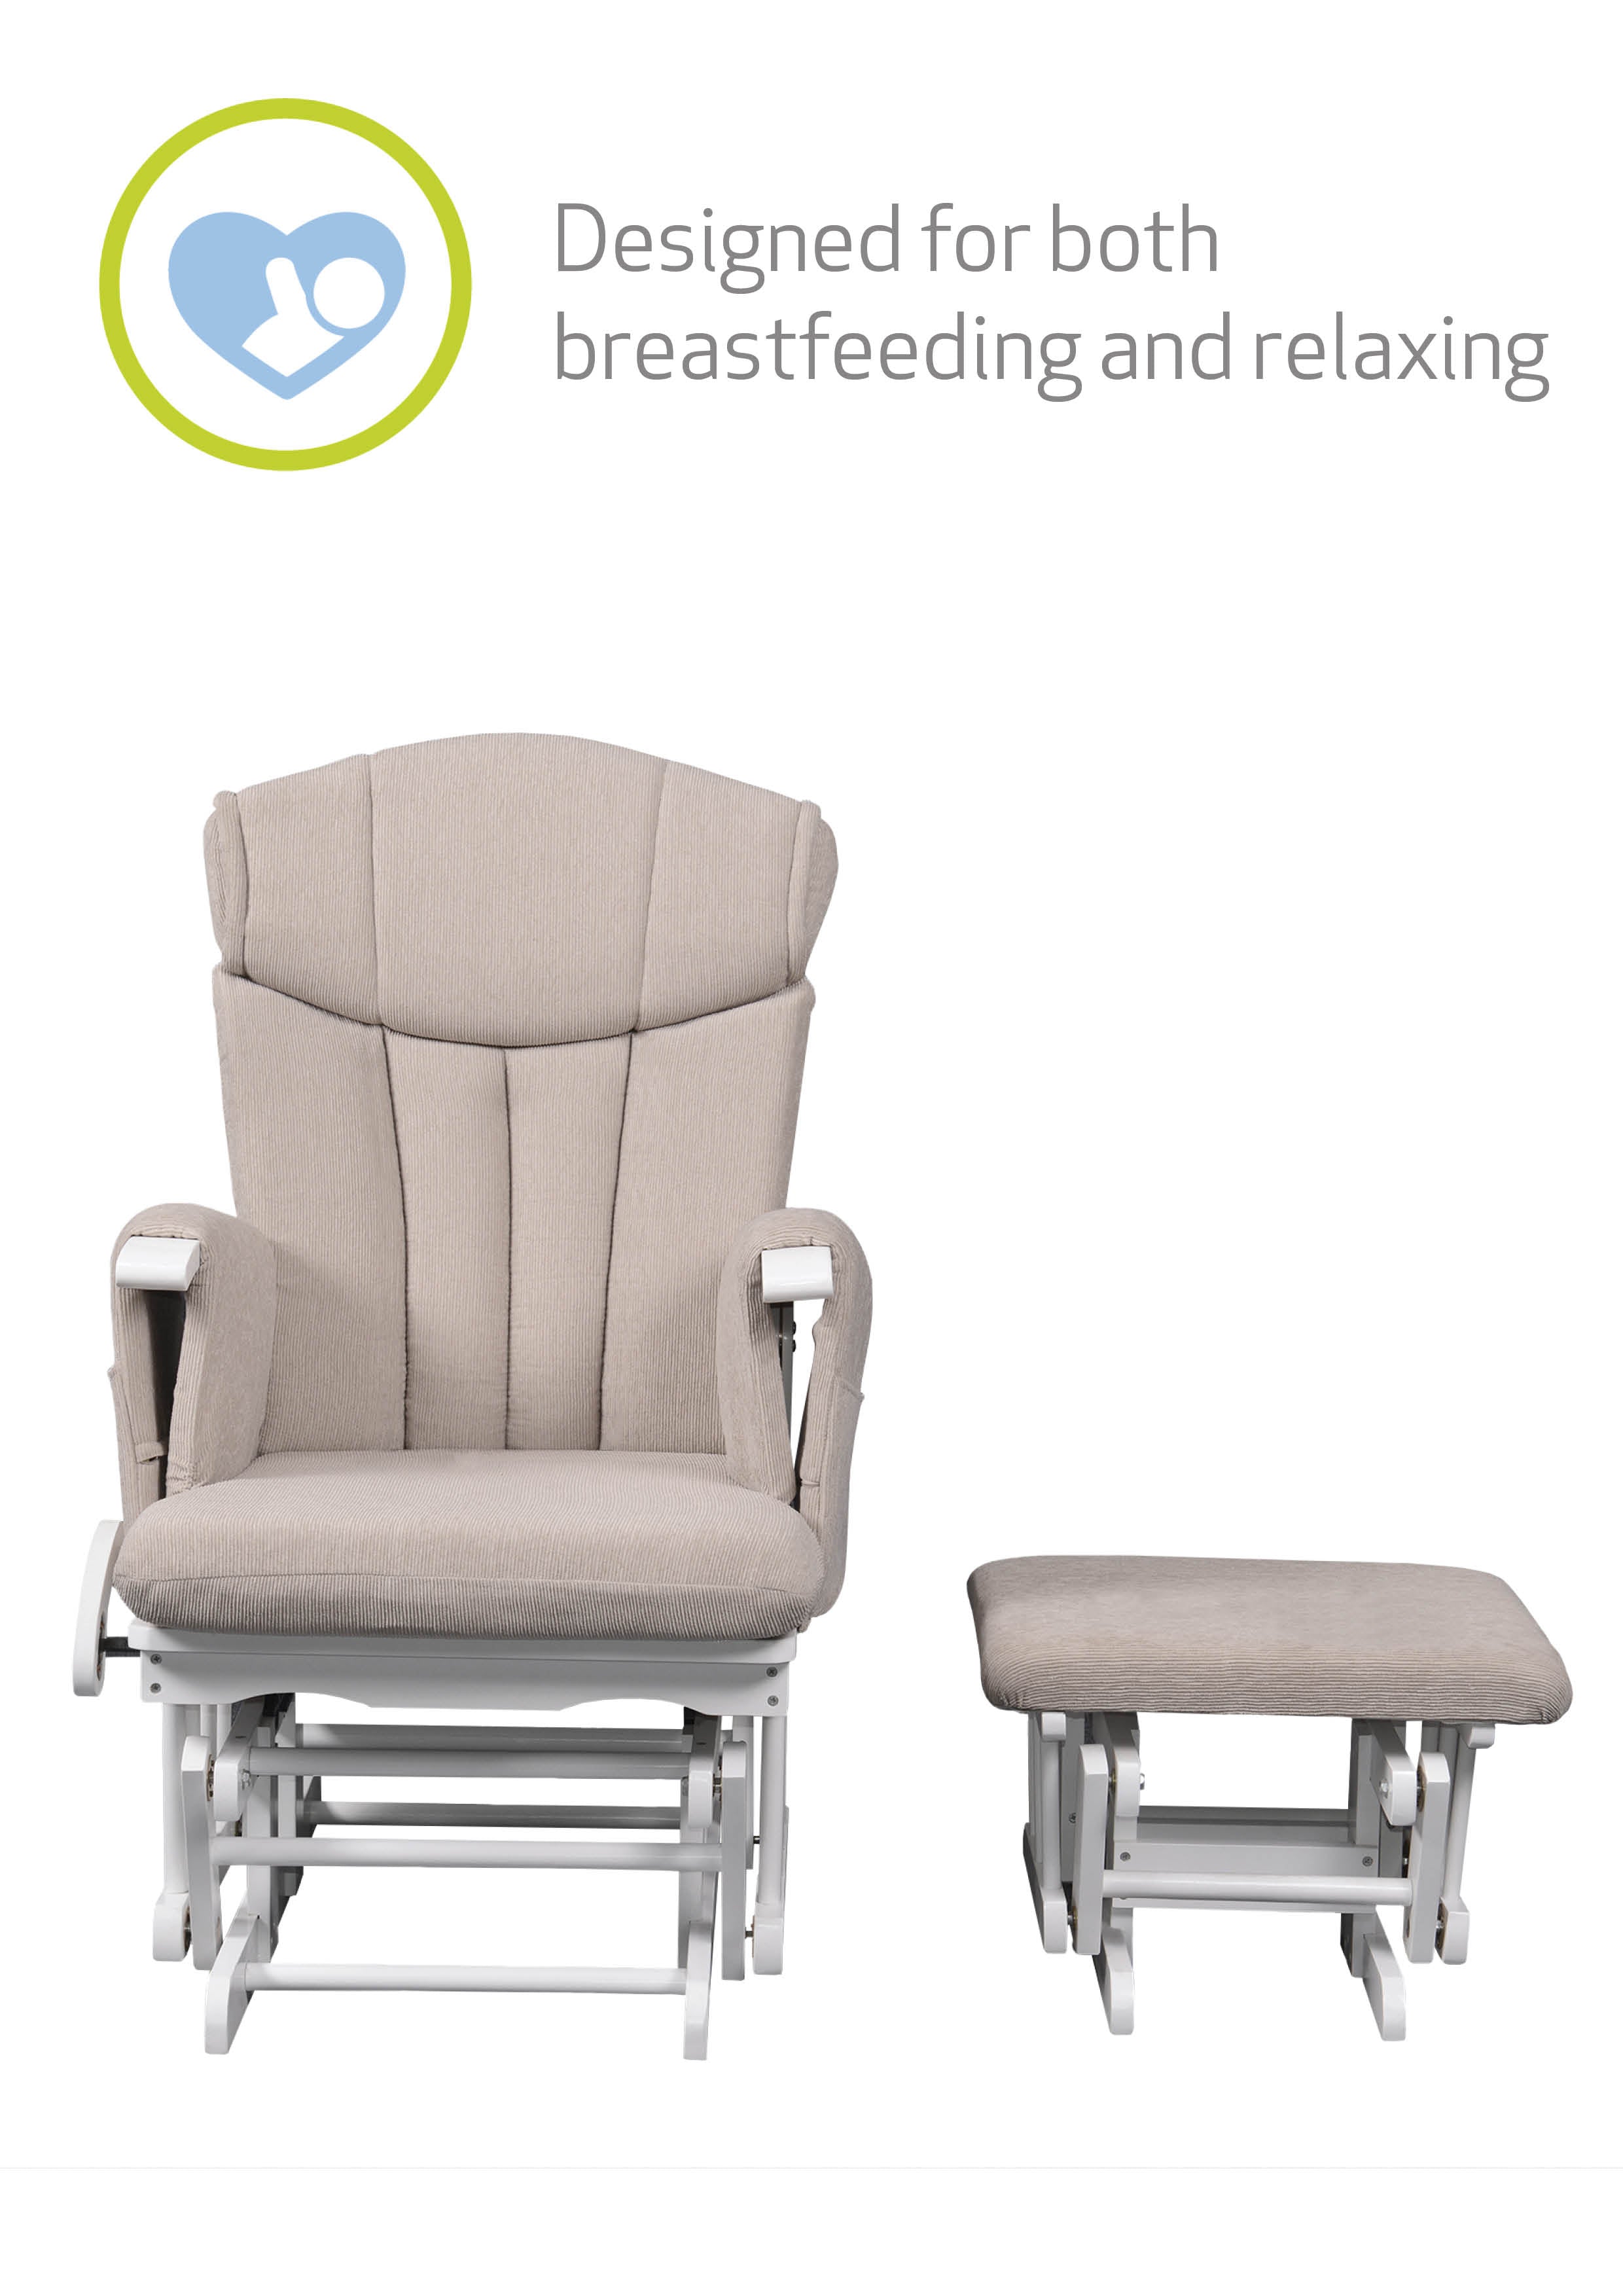 Chatsworth Nursing Chair and Footstool - 50% OFF